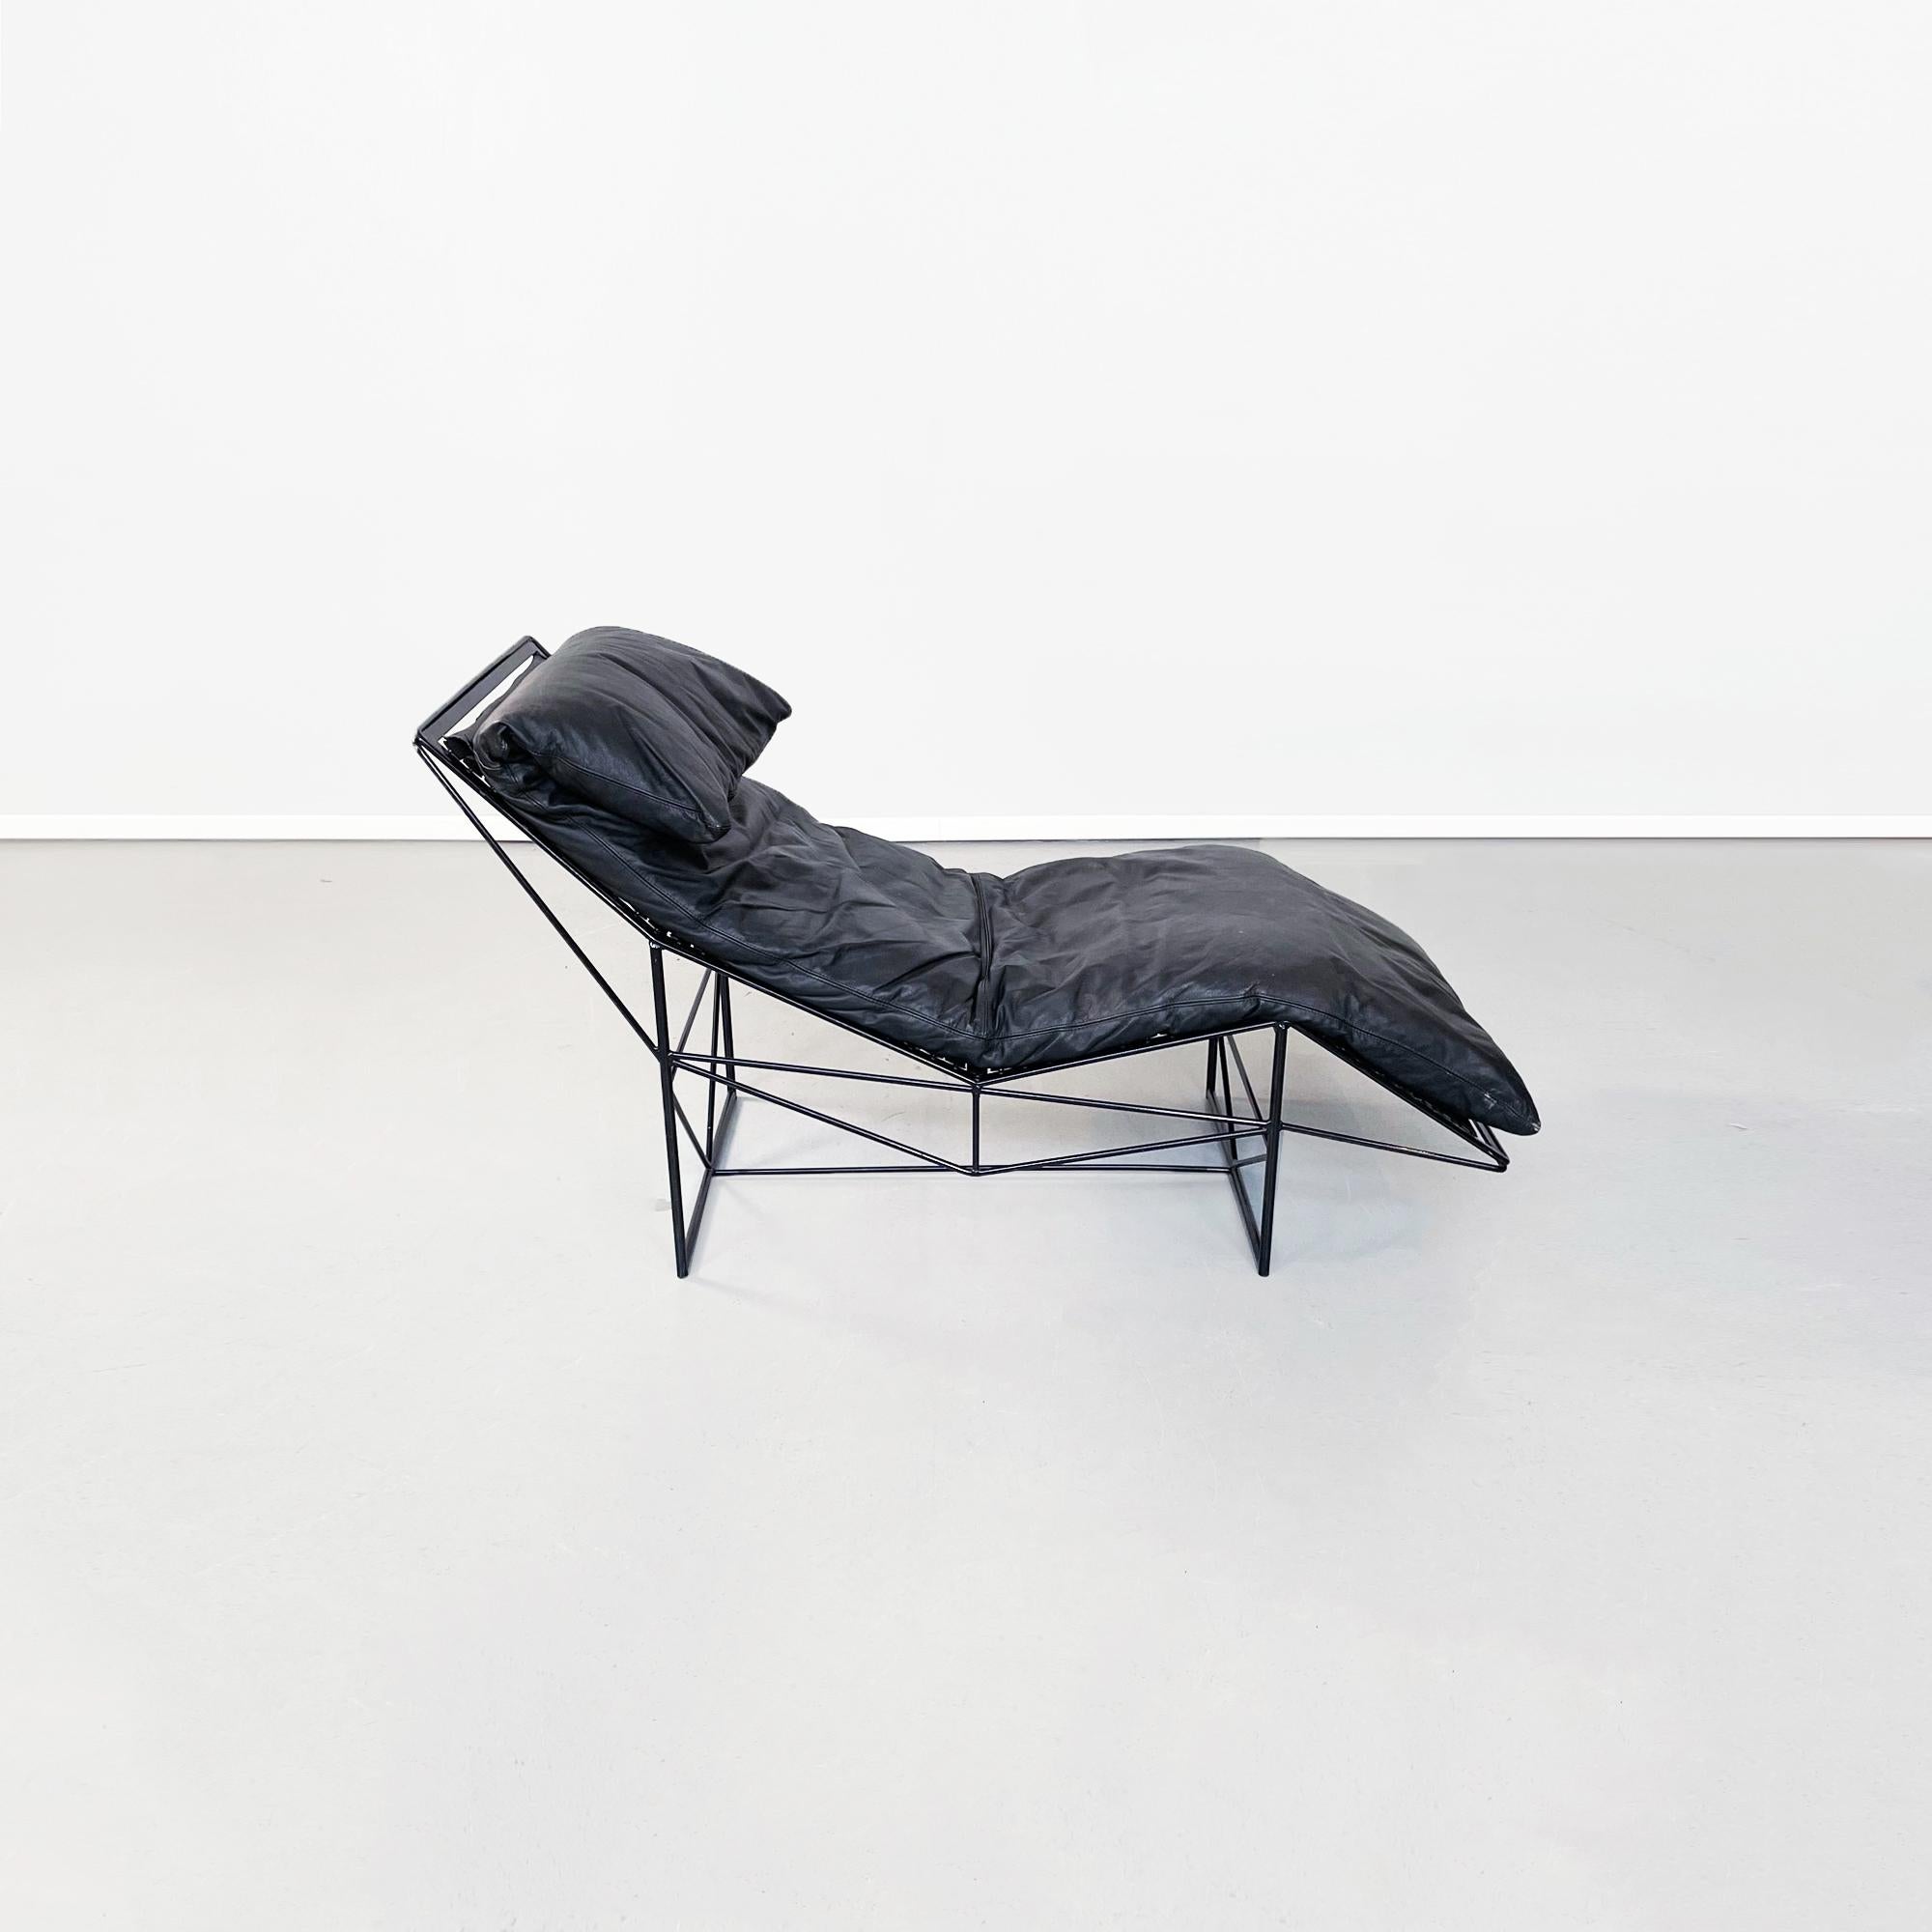 Mid-Century Modern Italian Mid-Century Chaise Lounge by Paolo Passerini for Uvet Dimensione, 1980s For Sale